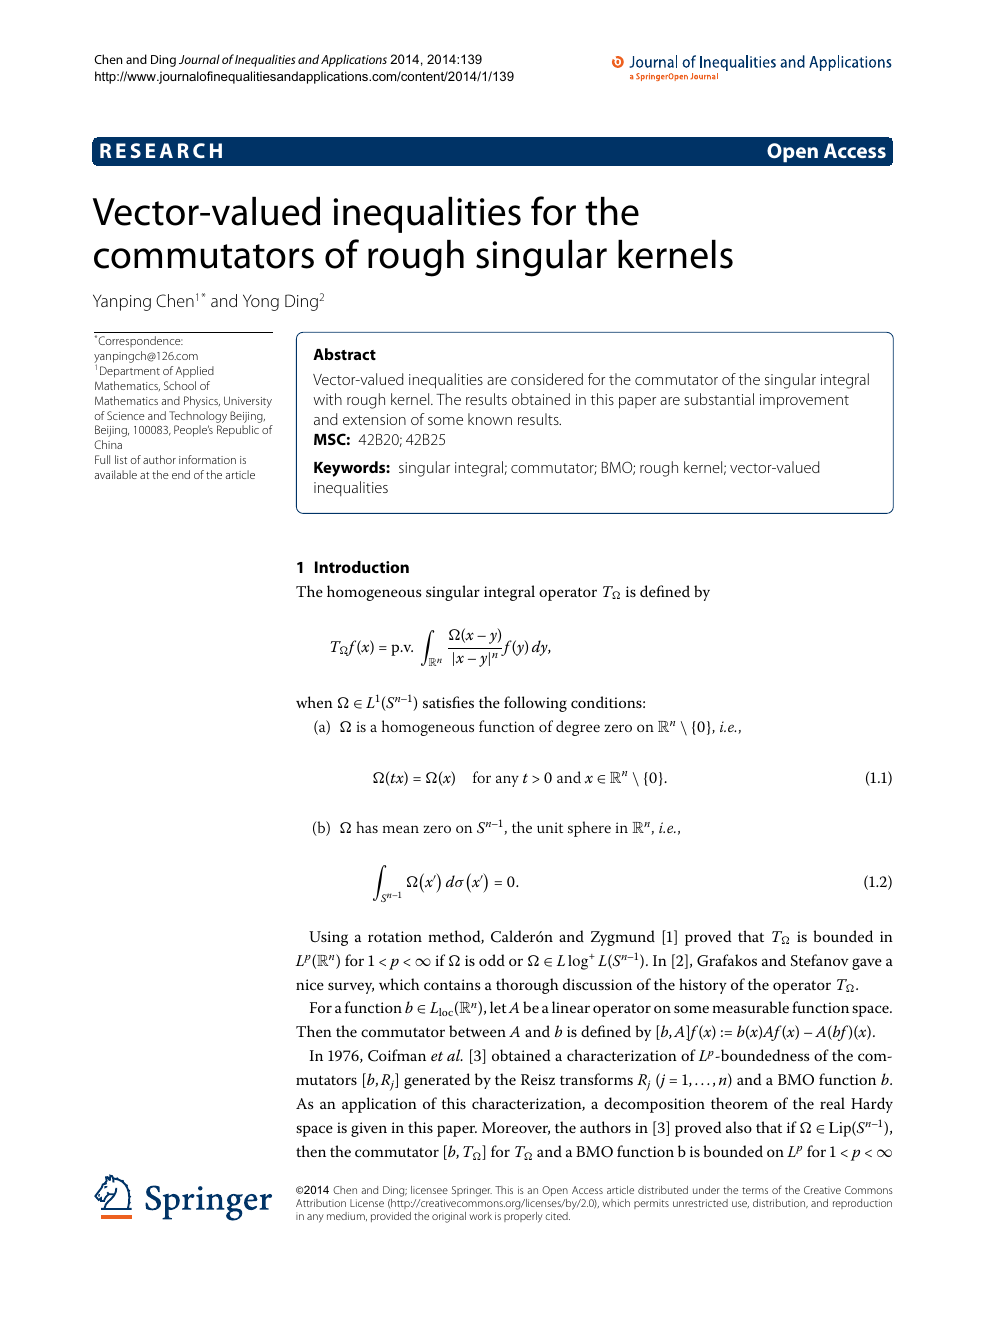 Vector Valued Inequalities For The Commutators Of Rough Singular Kernels Topic Of Research Paper In Mathematics Download Scholarly Article Pdf And Read For Free On Cyberleninka Open Science Hub